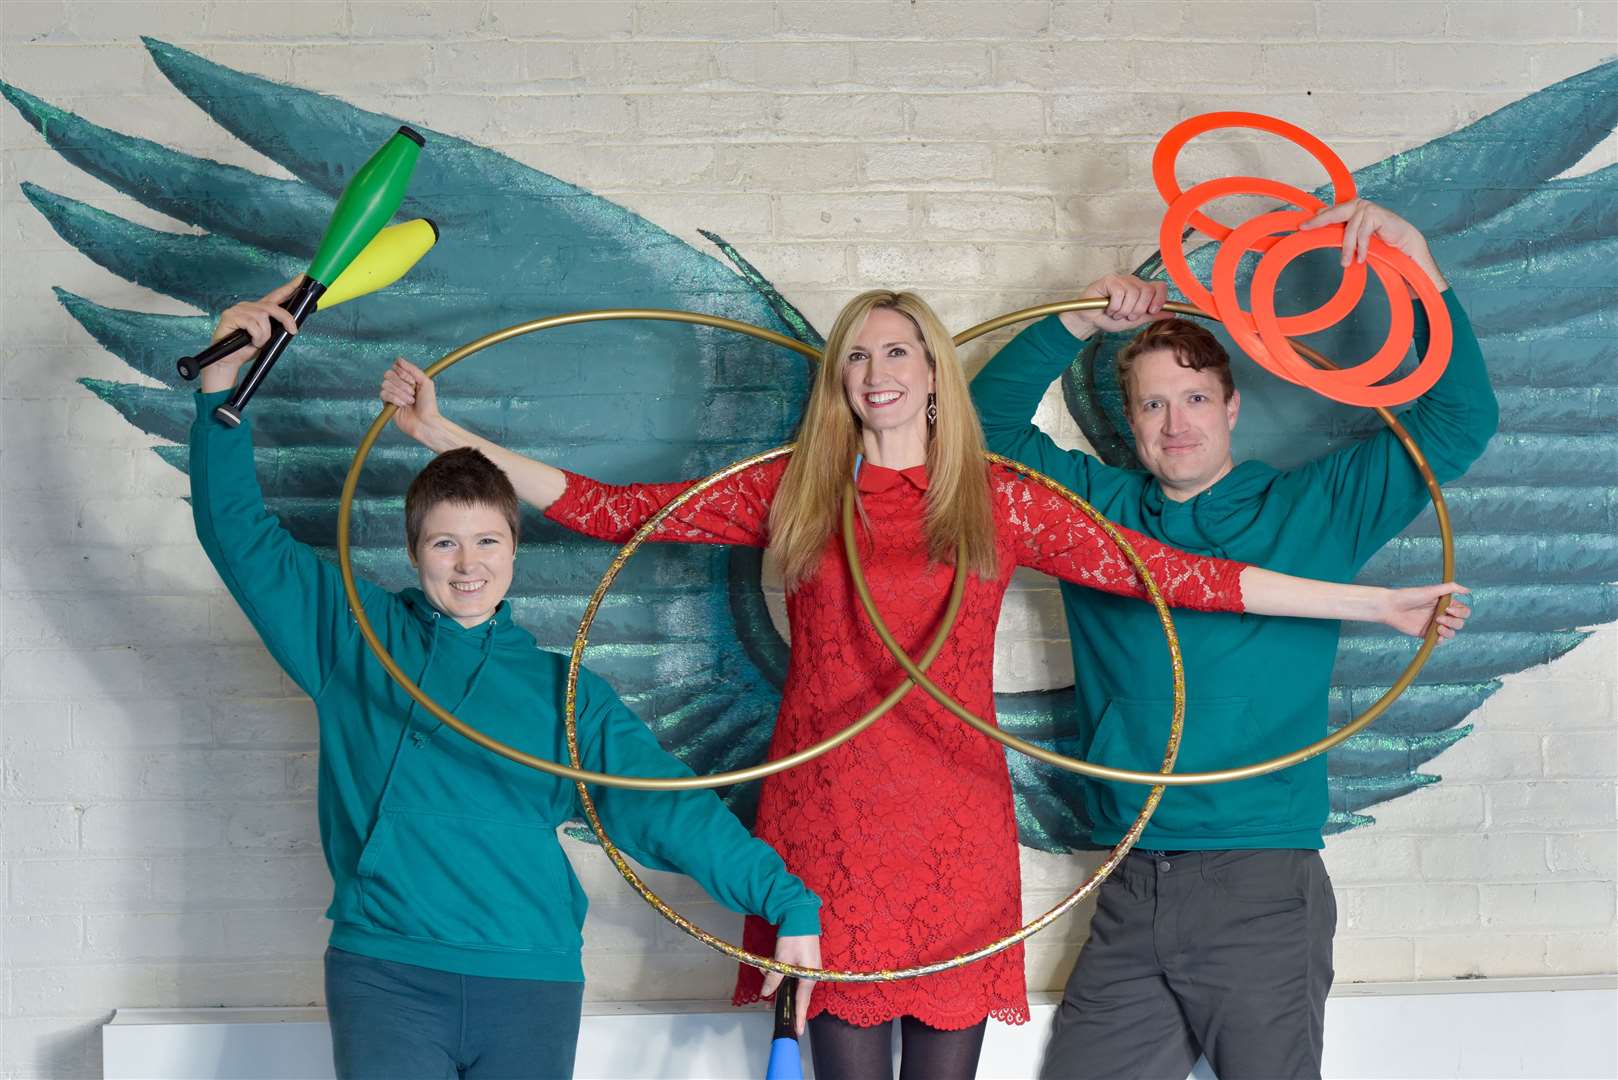 Joy Dunlop launches Seachdain Na Gàidhlig (World Gaelic Week)with help from Gaelic speaker and acrobatic educator Kit Rodman-Orr and Scott Craig, director of Community Circus Paisley.